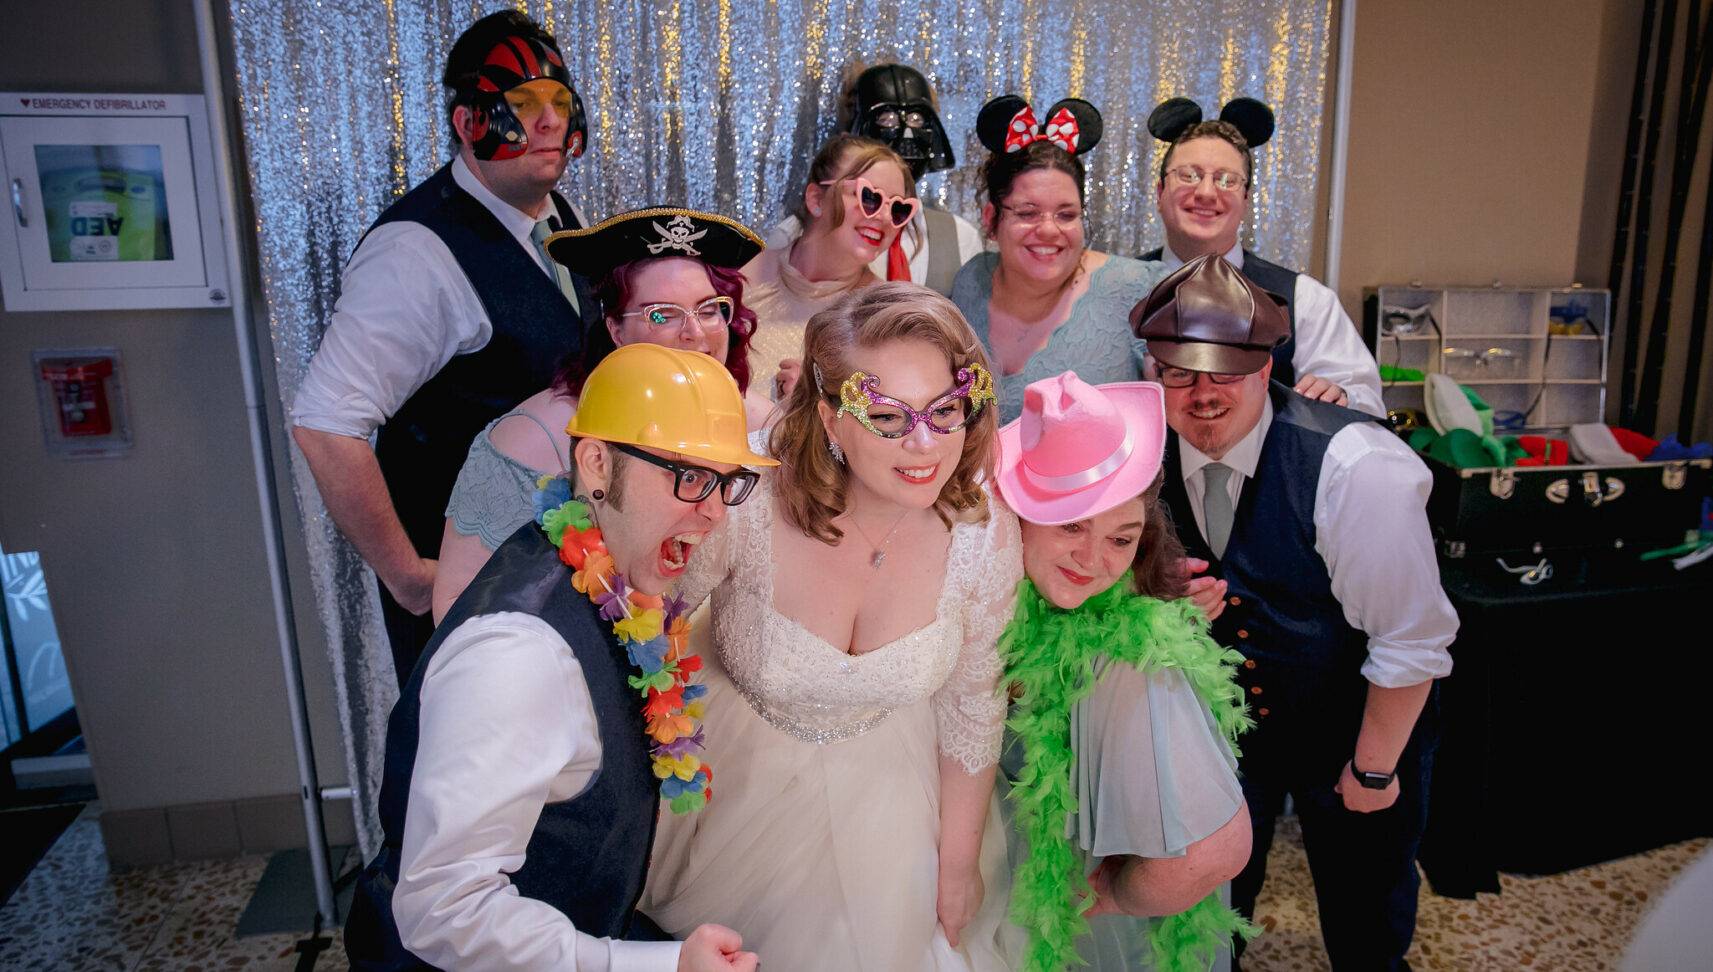 group photo with a photo booth at a wedding